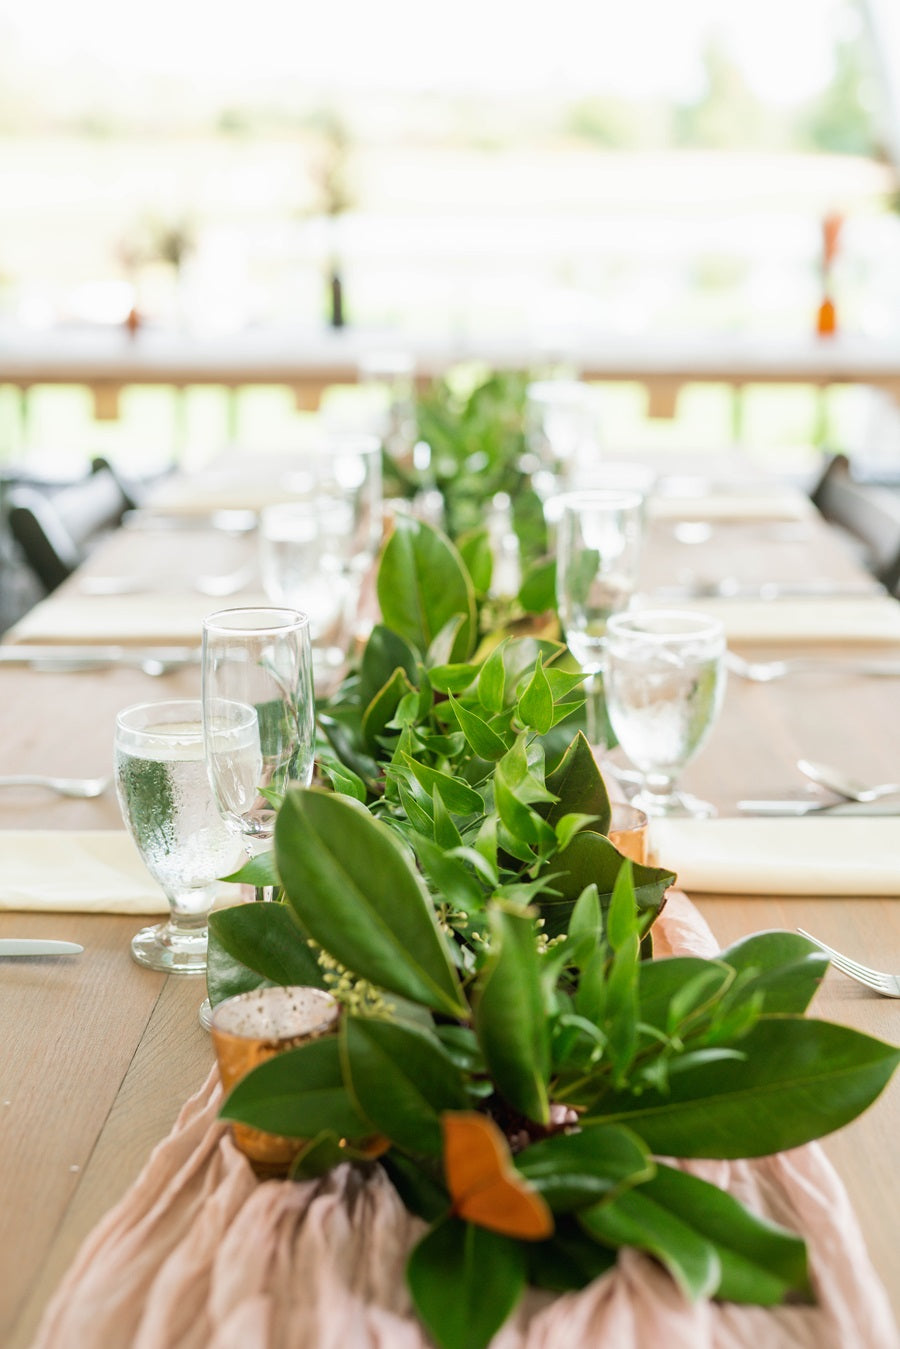 Table photo featuring the greenery running down the center.